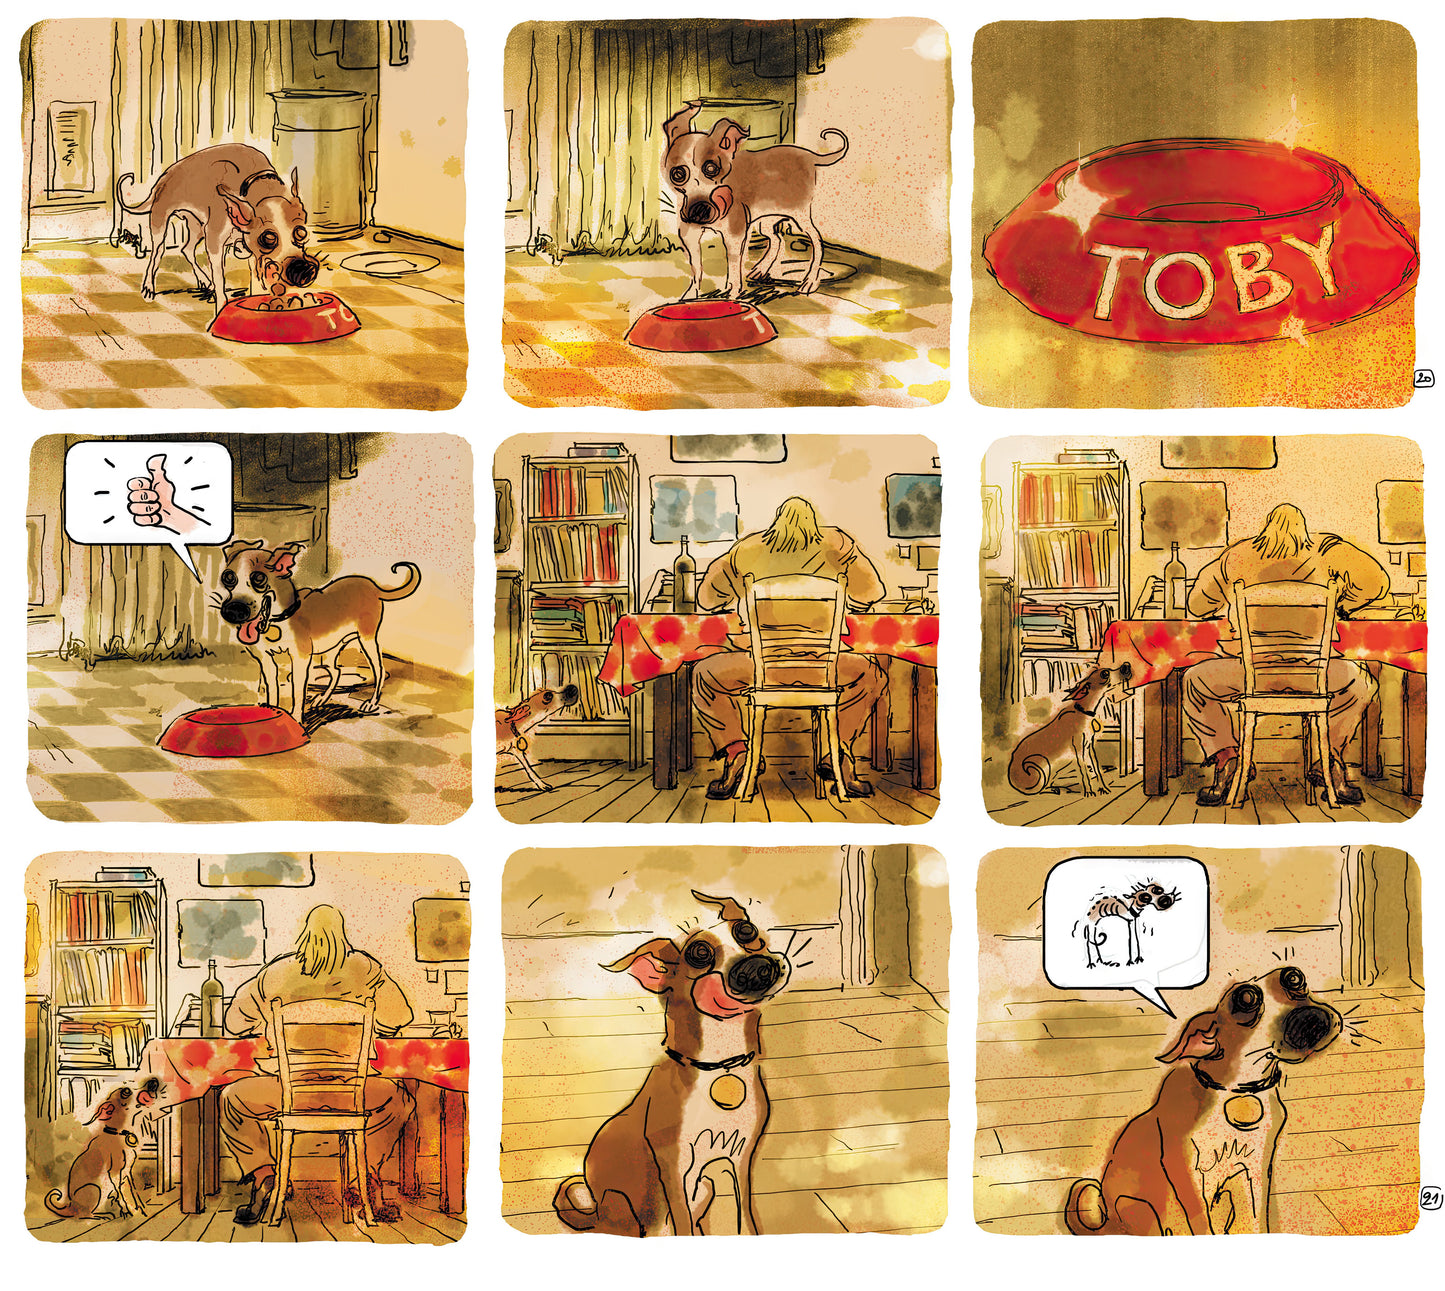 MY FRIEND TOBY by Gregory Panaccione